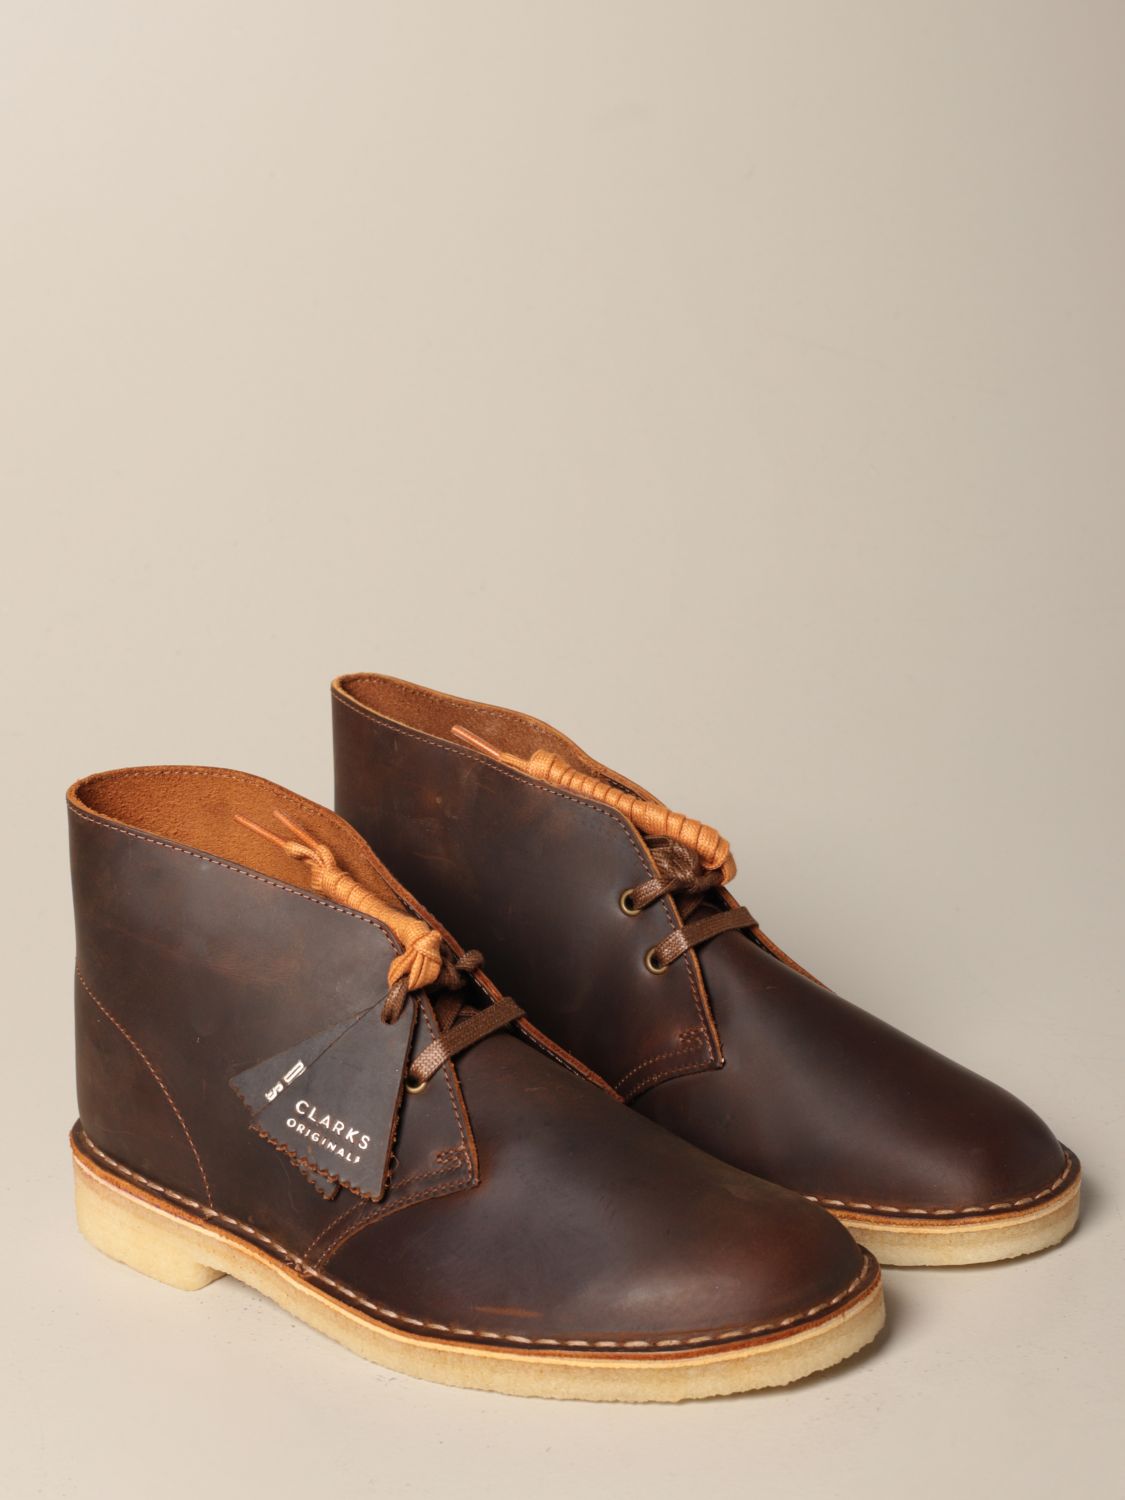 Clarks Outlet: desert boot in vintage effect leather - Brown | Clarks chukka 26155484 online at GIGLIO.COM